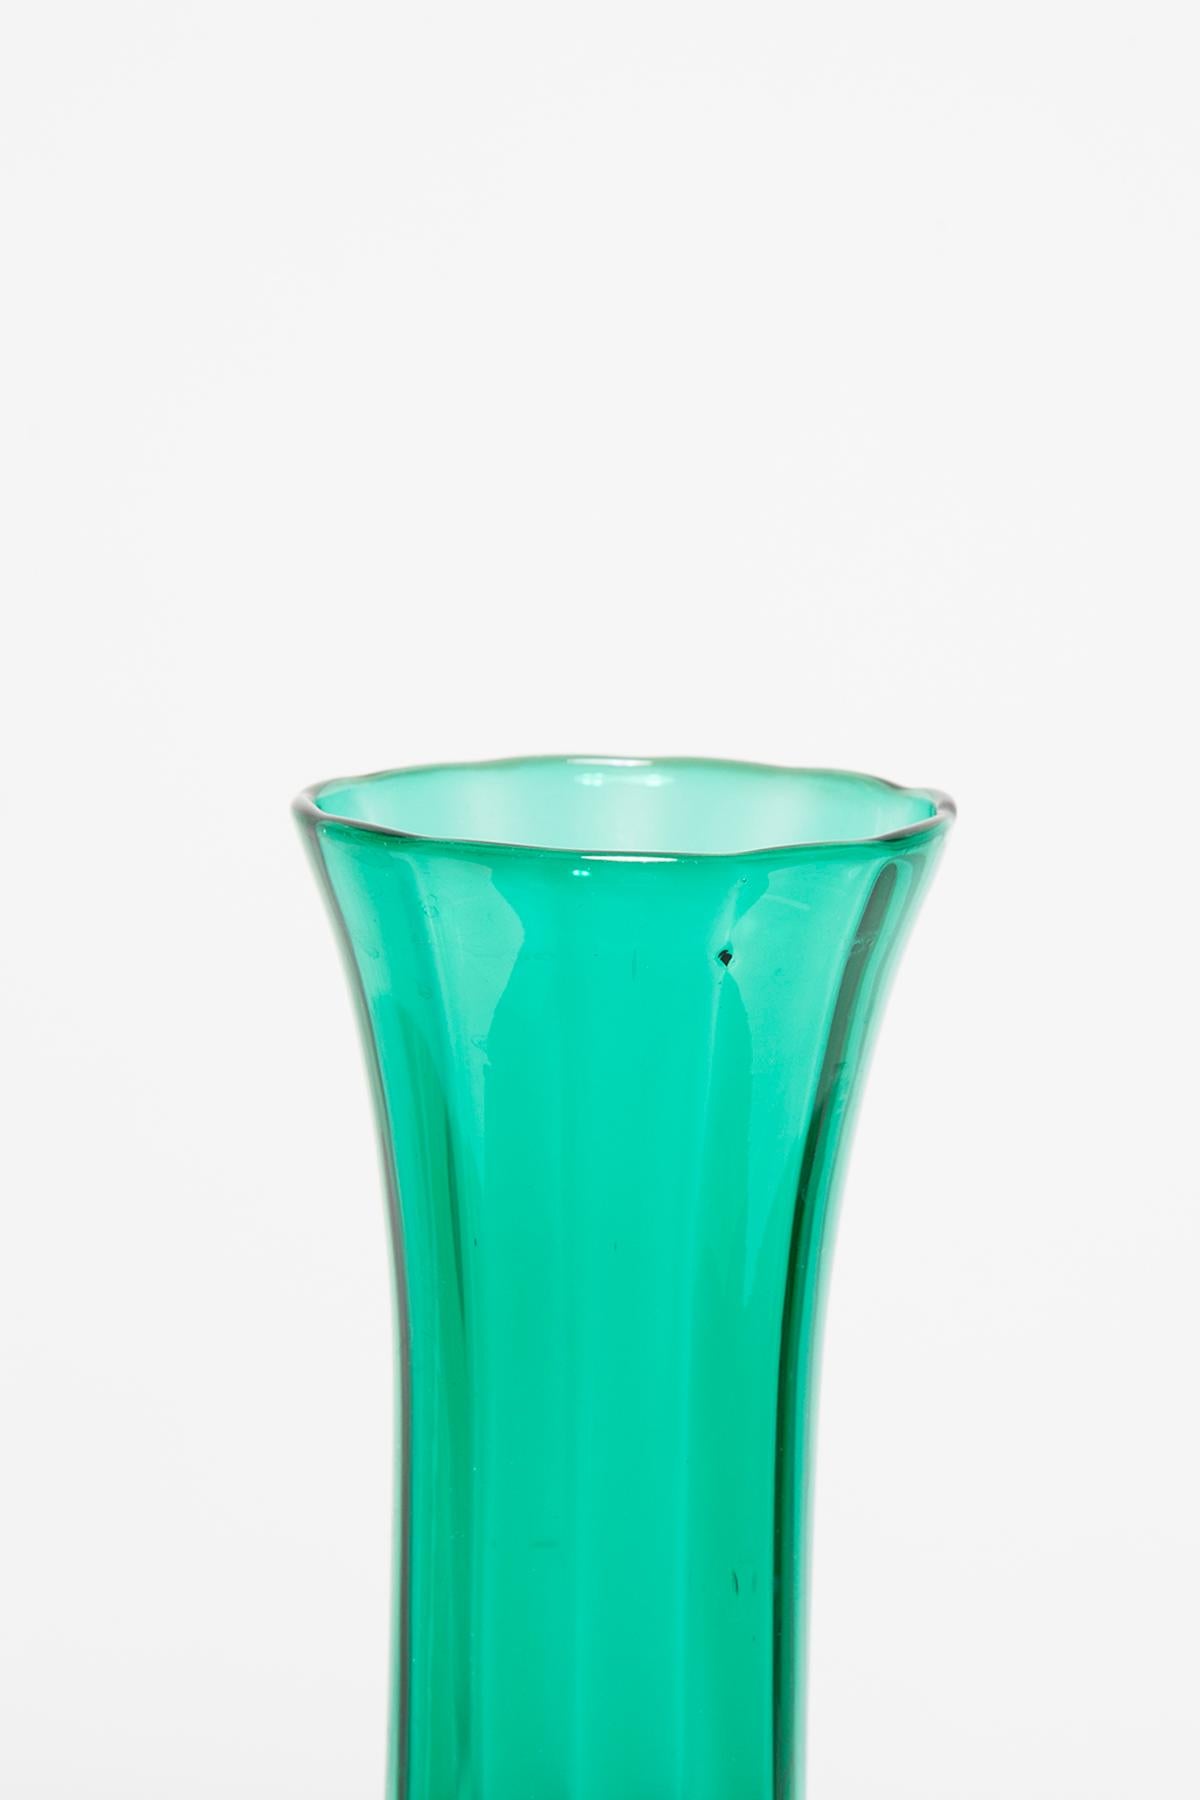 Mid Century Vintage Artistic Glass Green Vase, Europe, 1970s For Sale 5